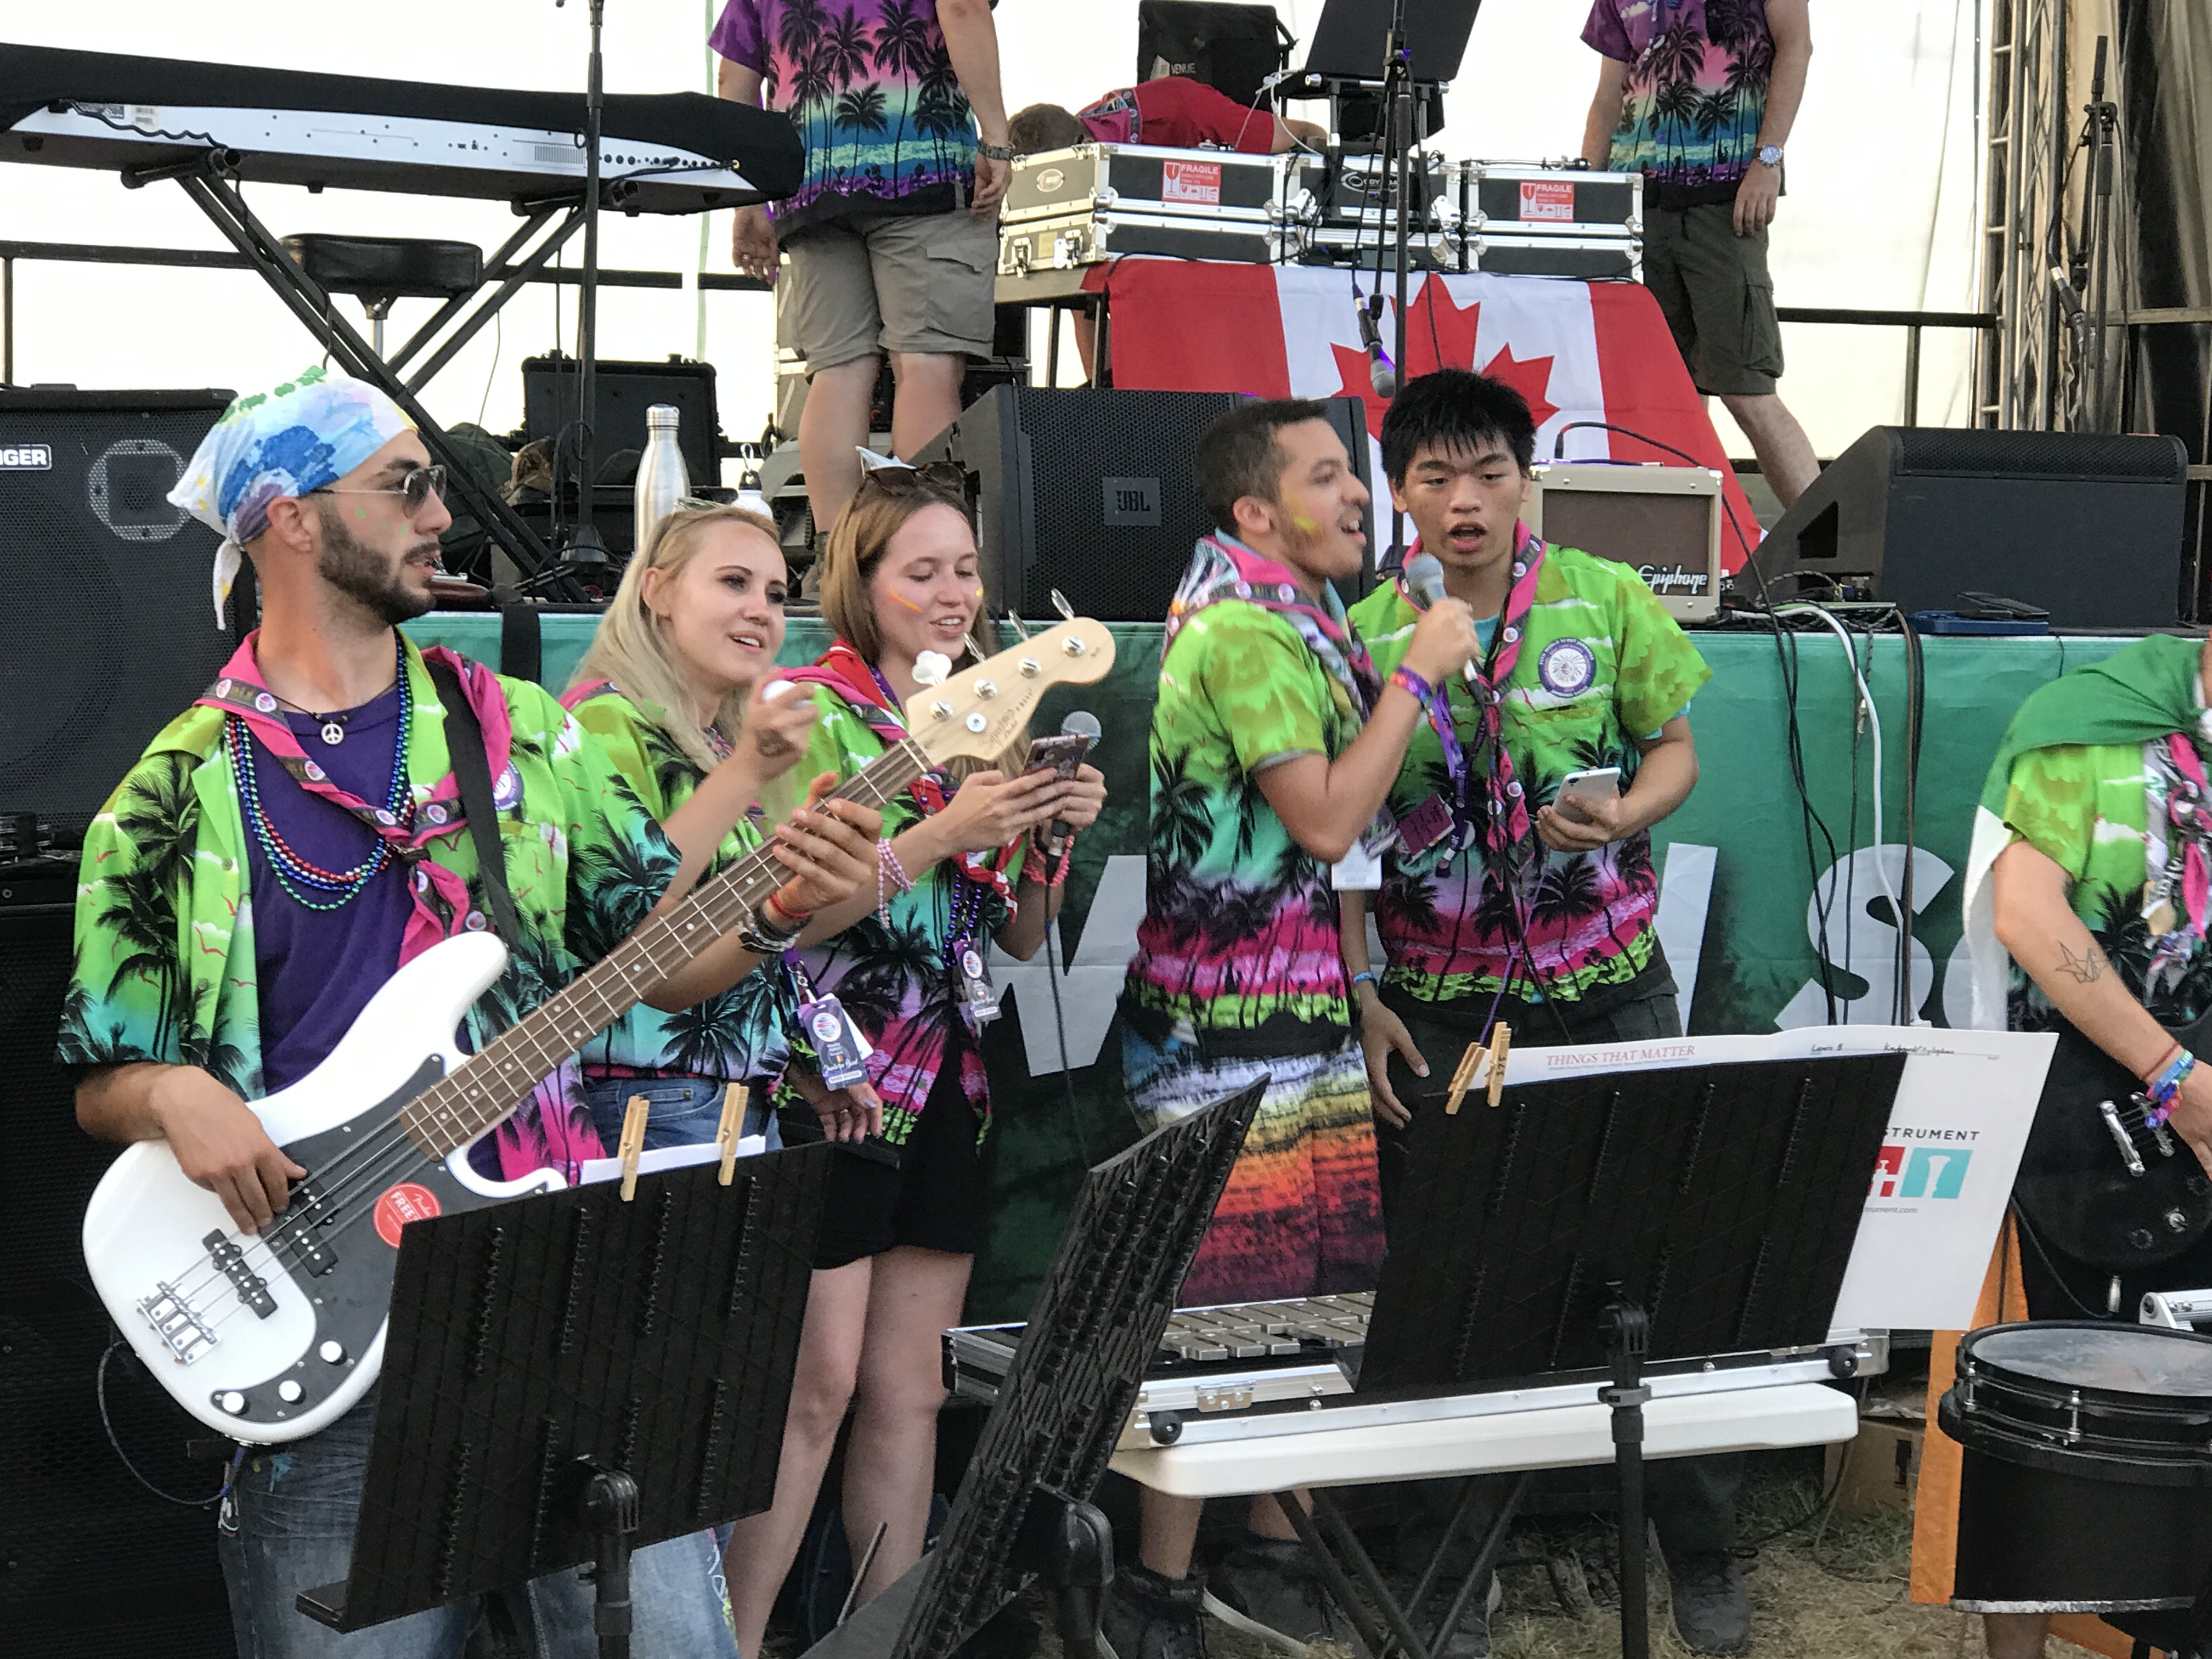 Interview with the Jamboree Band